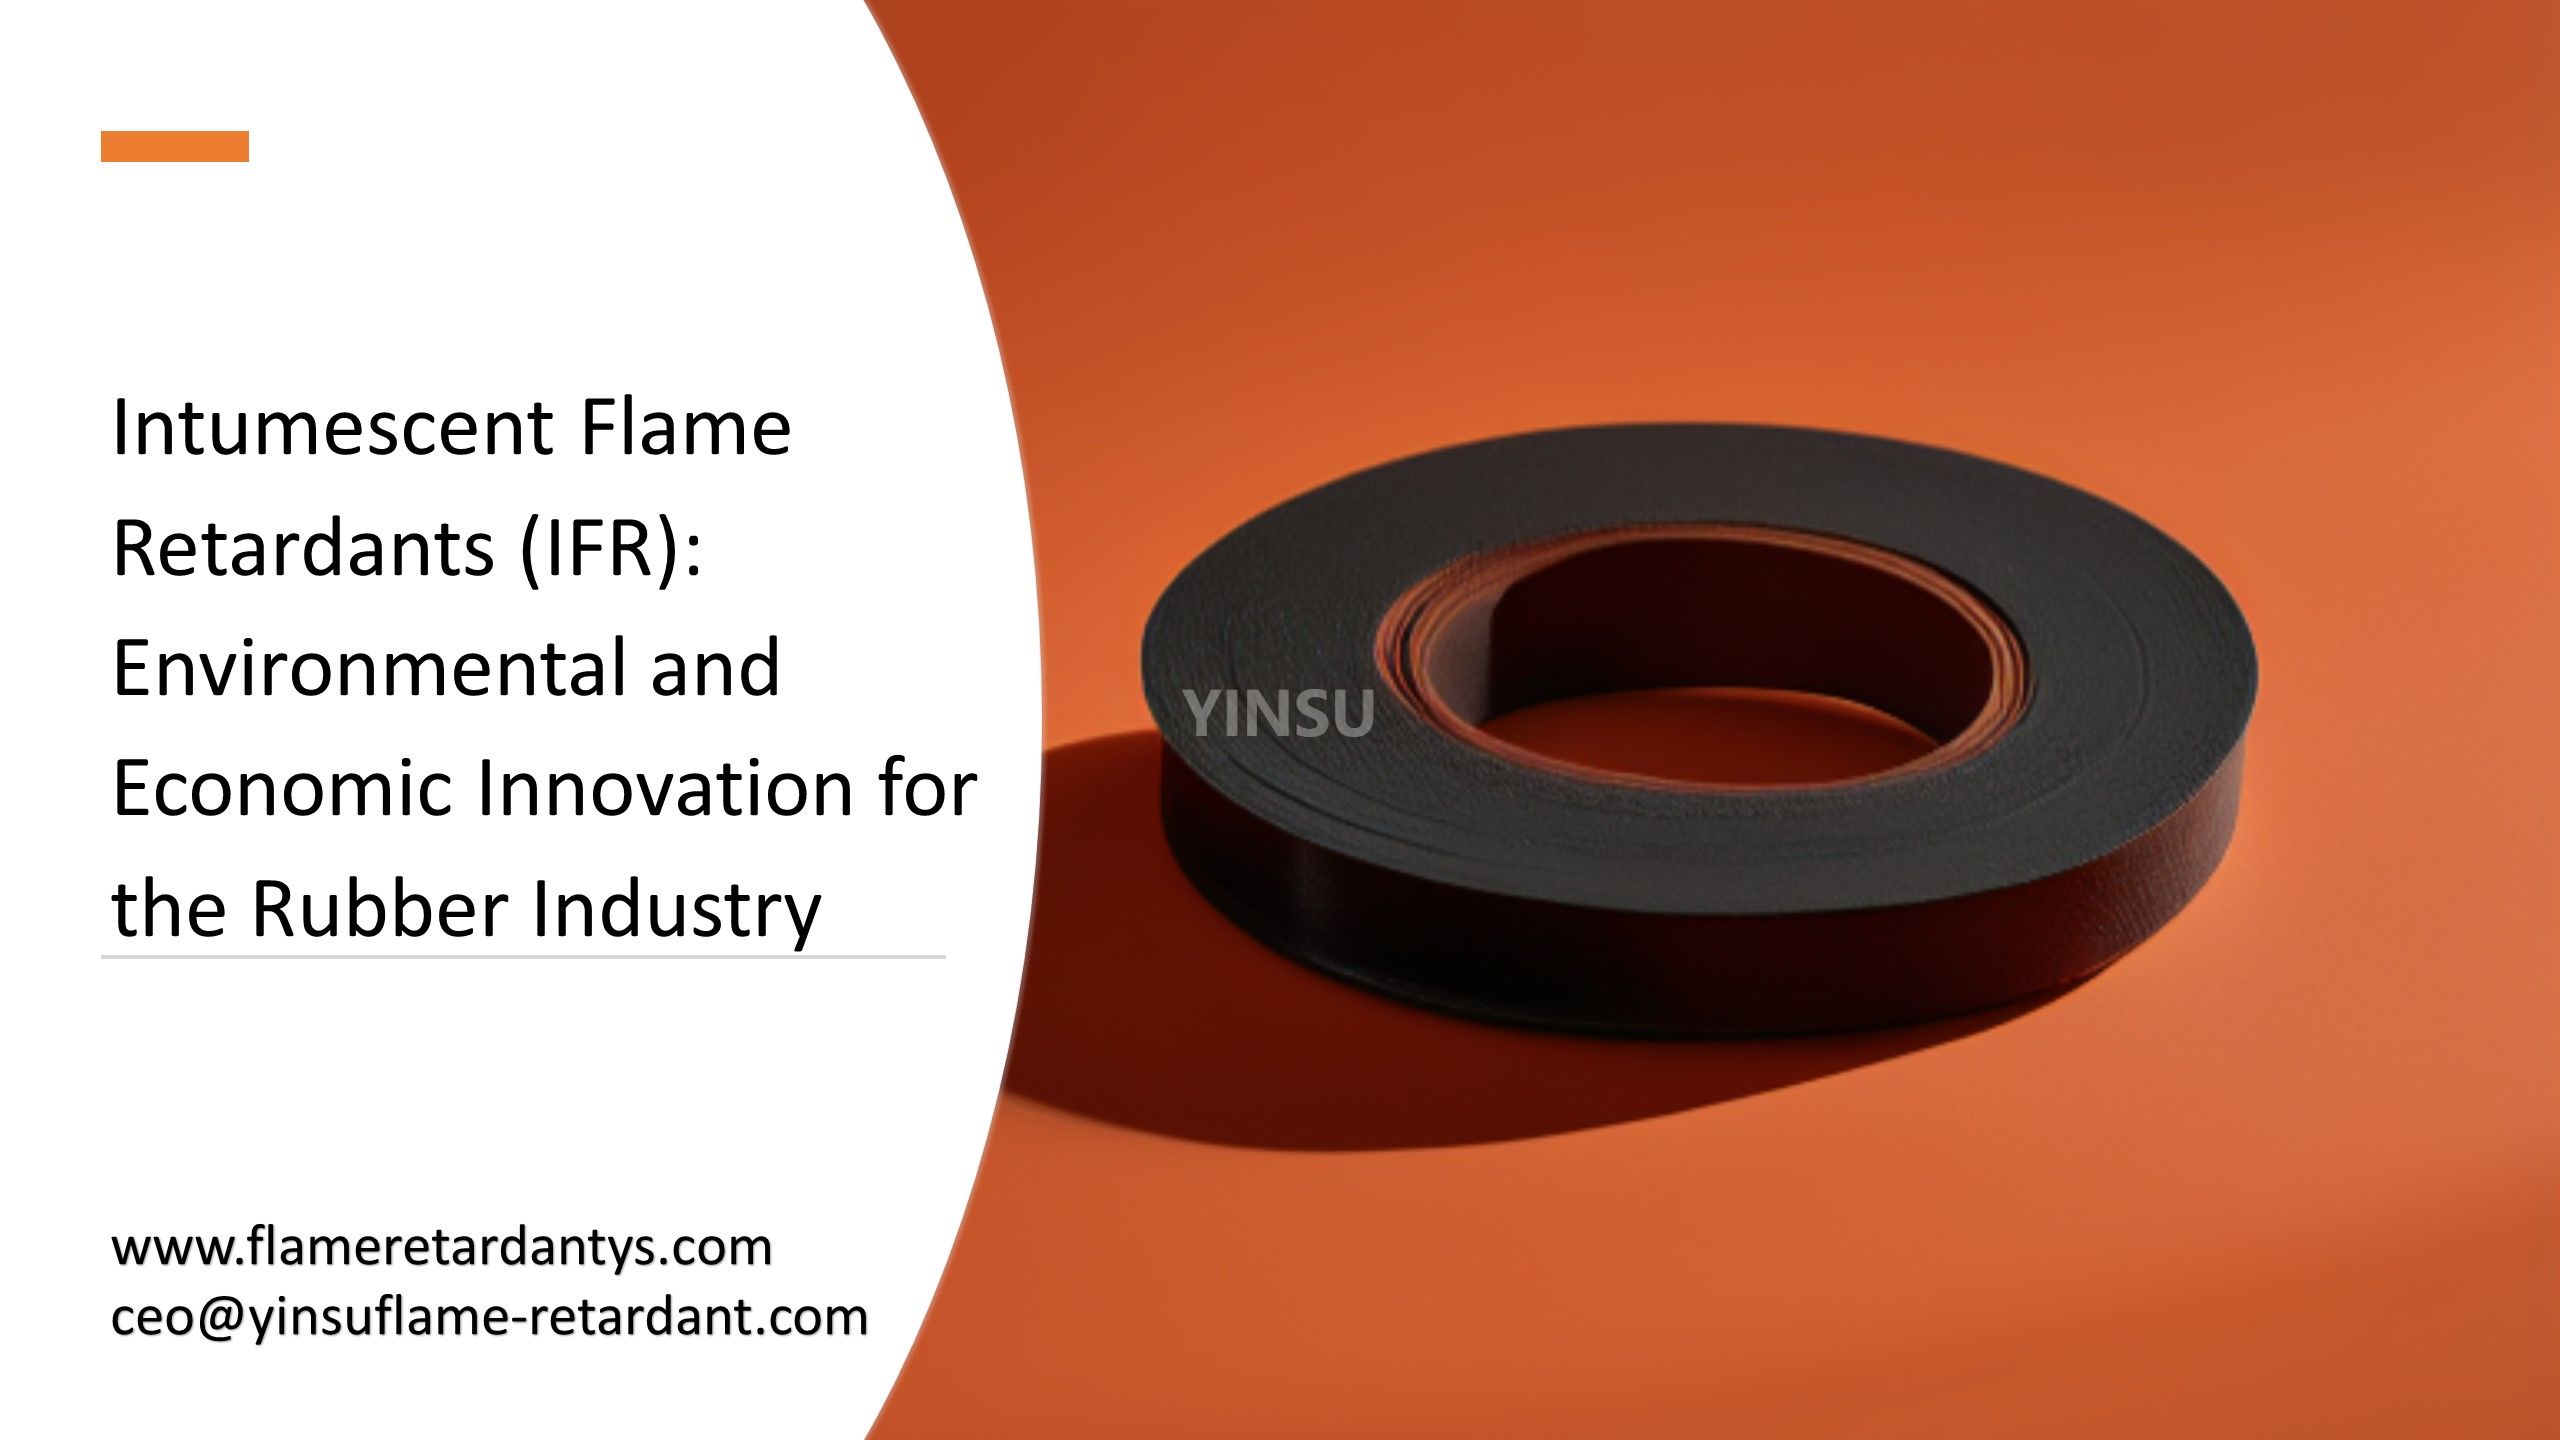 Intumescent Flame Retardants (IFR): Environmental And Economic Innovation for The Rubber Industry